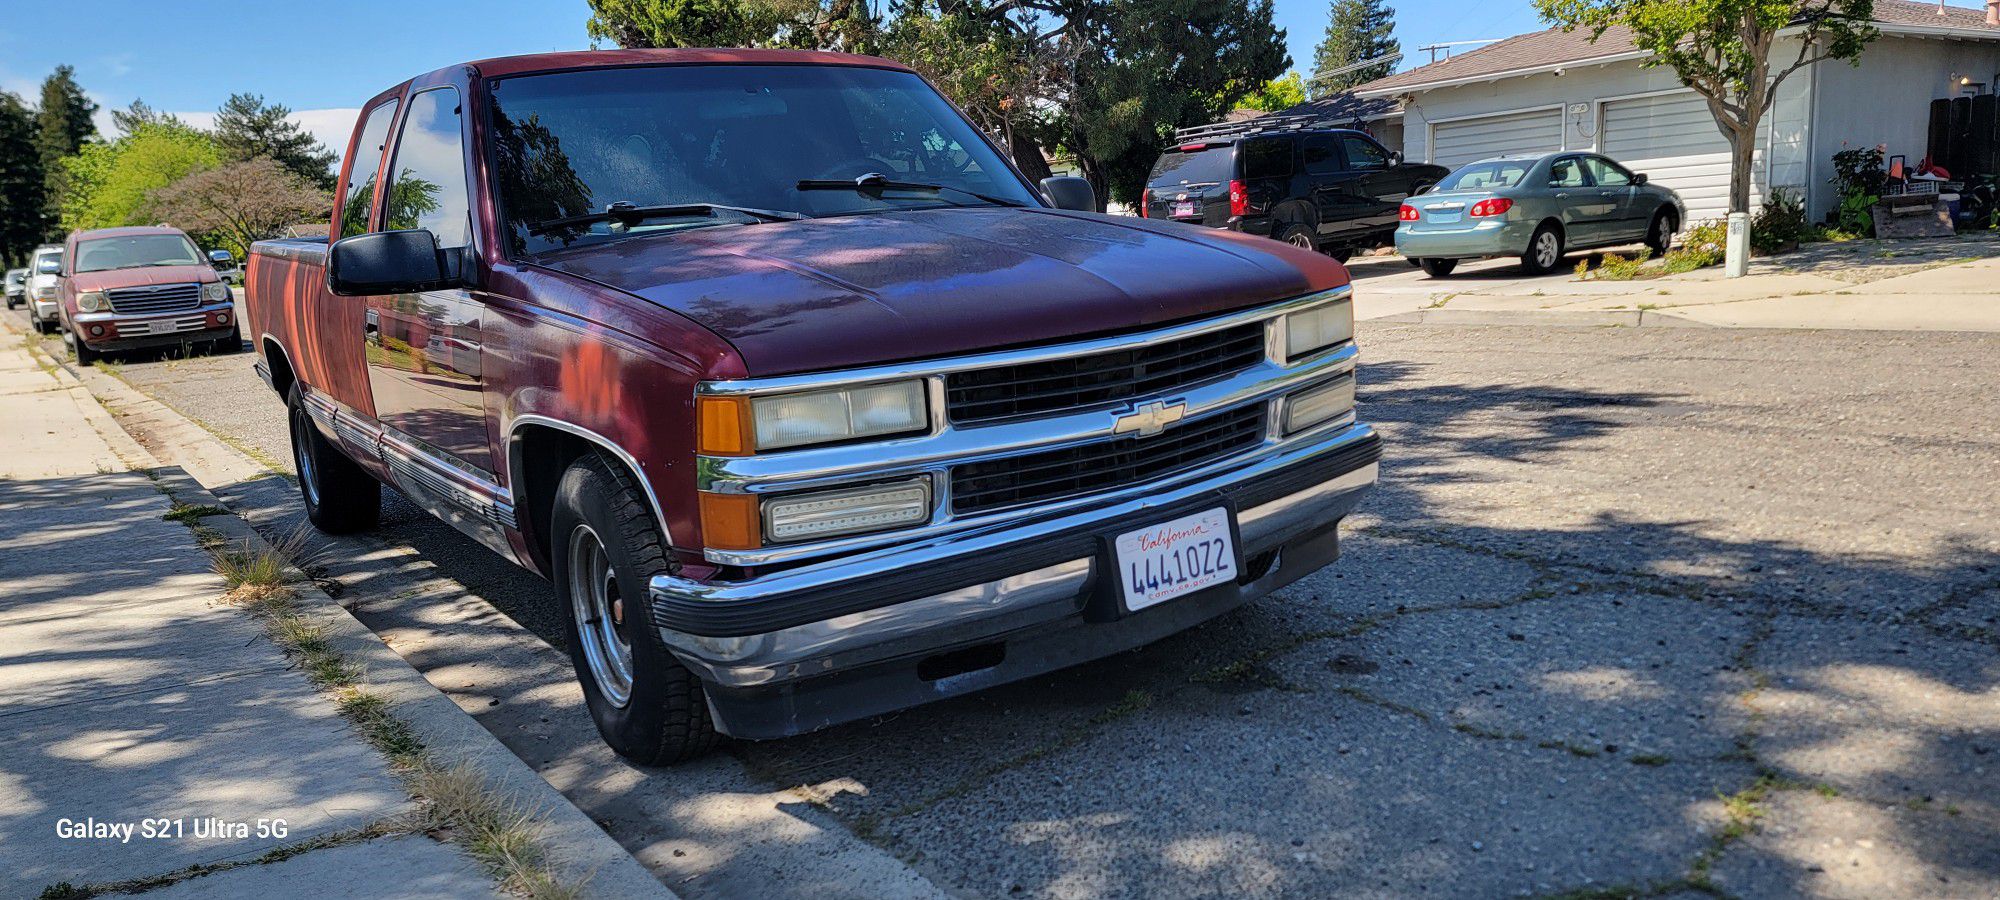 1990 Chevy Extended cab truck SALVAGE Title 